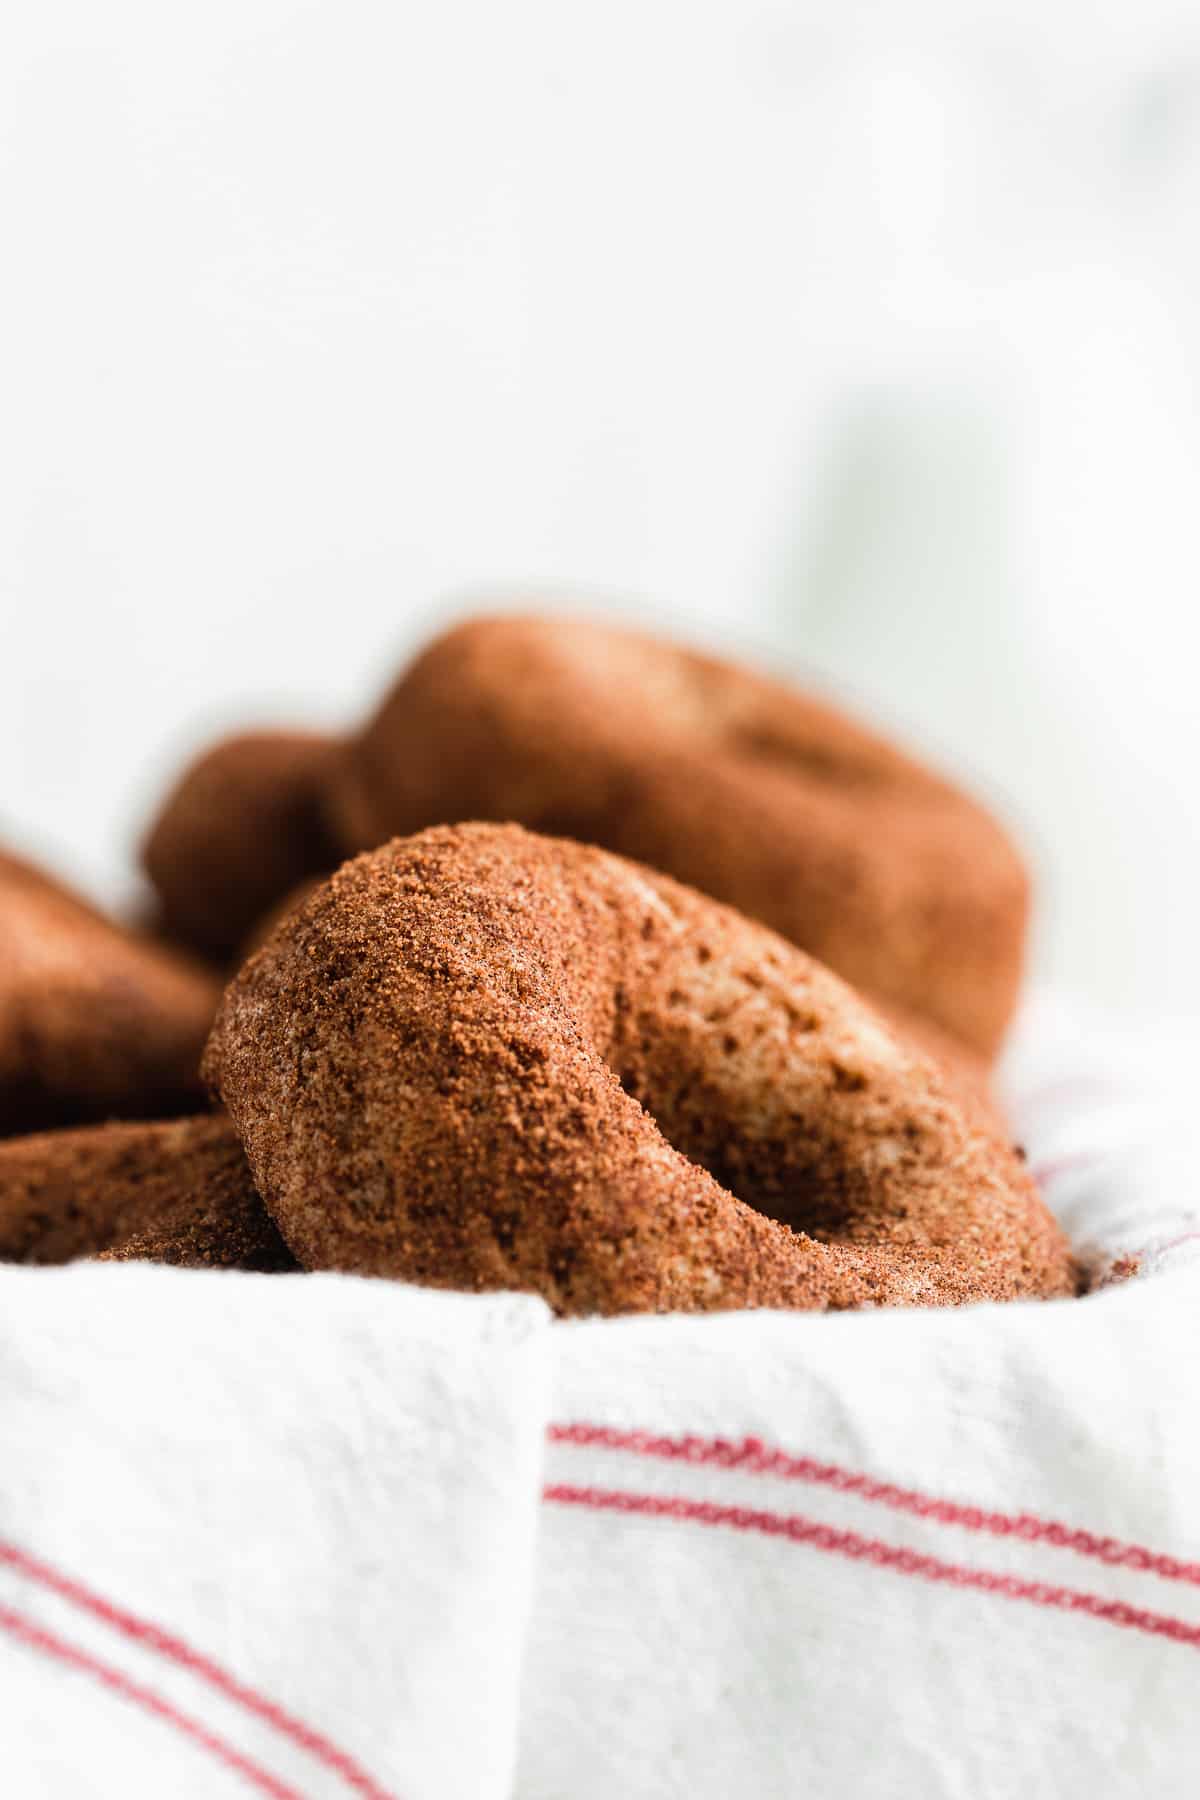 Cinnamon doughnuts in a basket with a white and red cloth.